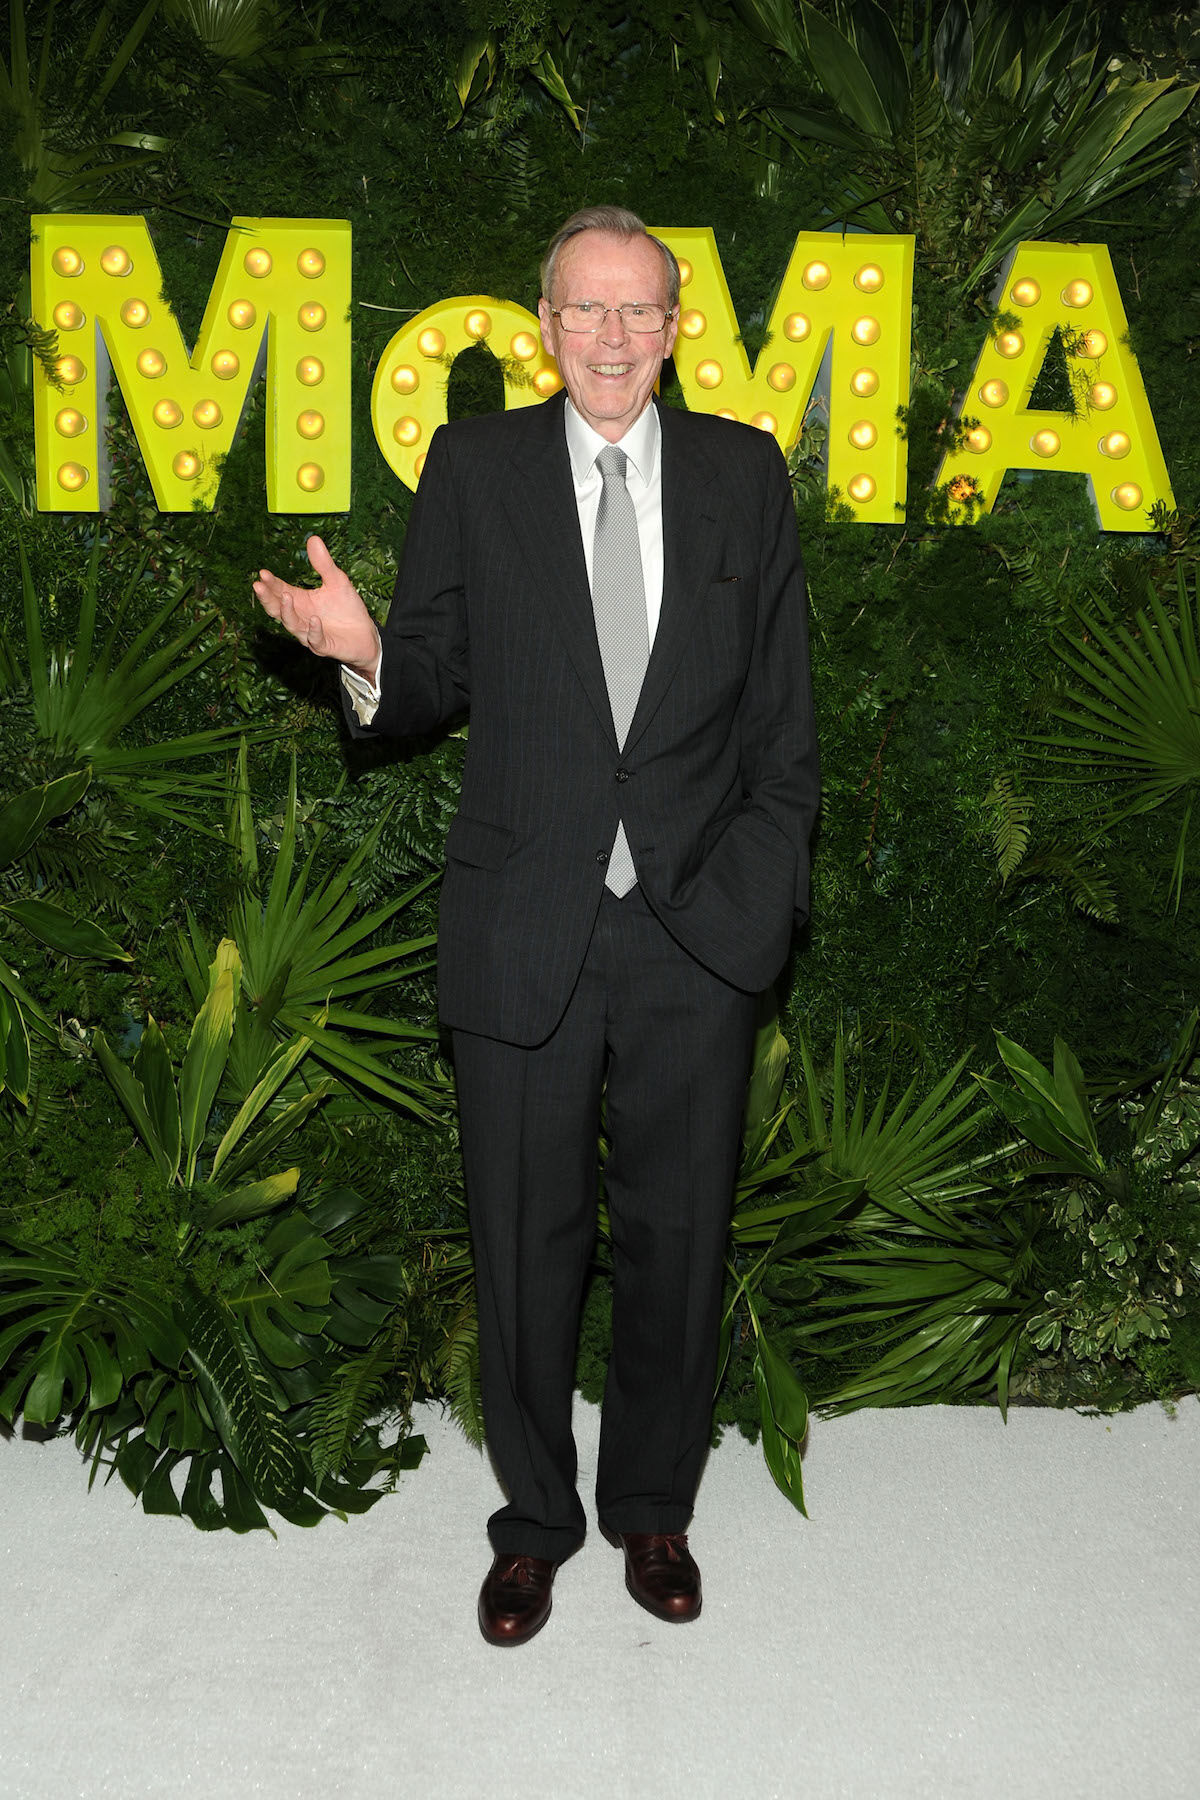 Collector and financier Donald Marron attends the 2013 Party In The Garden at the Museum of Modern Art. Photo by Ben Gabbe/Getty Images.